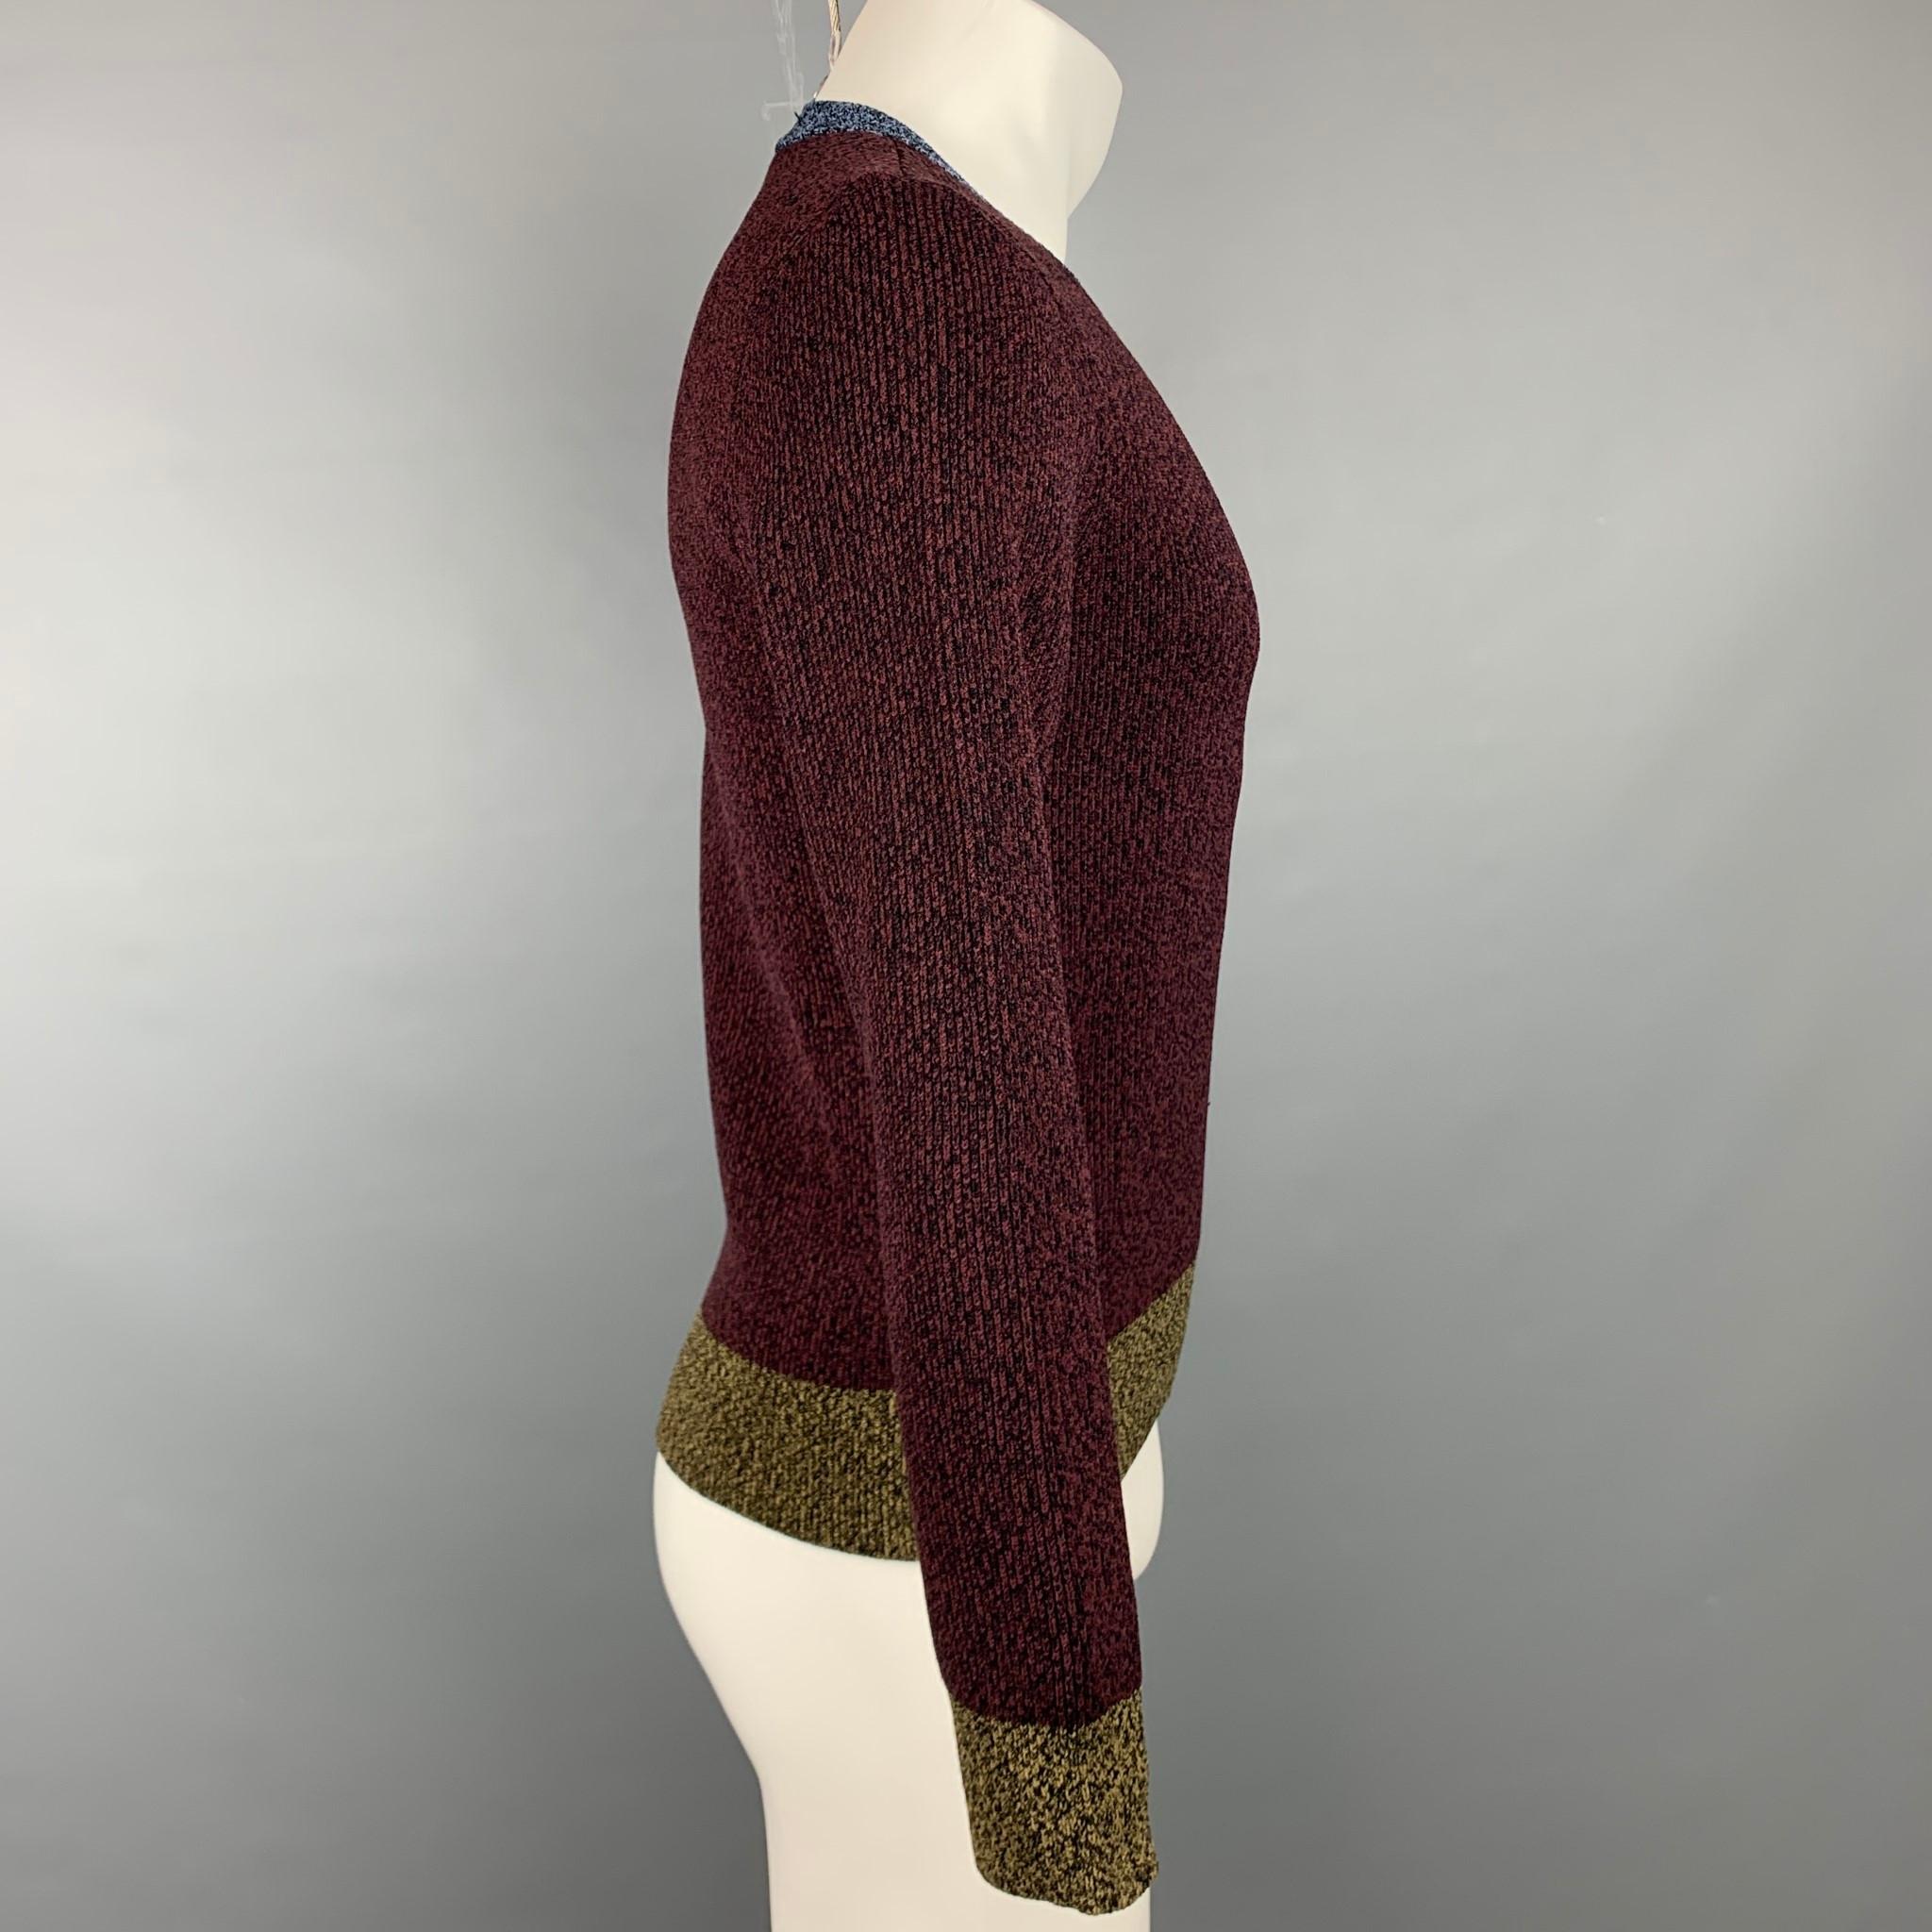 VALENTINO pullover comes in a burgundy & black heather viscose blend featuring a crew-neck. Made in Italy.

Very Good Pre-Owned Condition.
Marked: XS

Measurements:

Shoulder: 17 in.
Chest: 36 in.
Sleeve: 24.5 in.
Length: 23 in. 